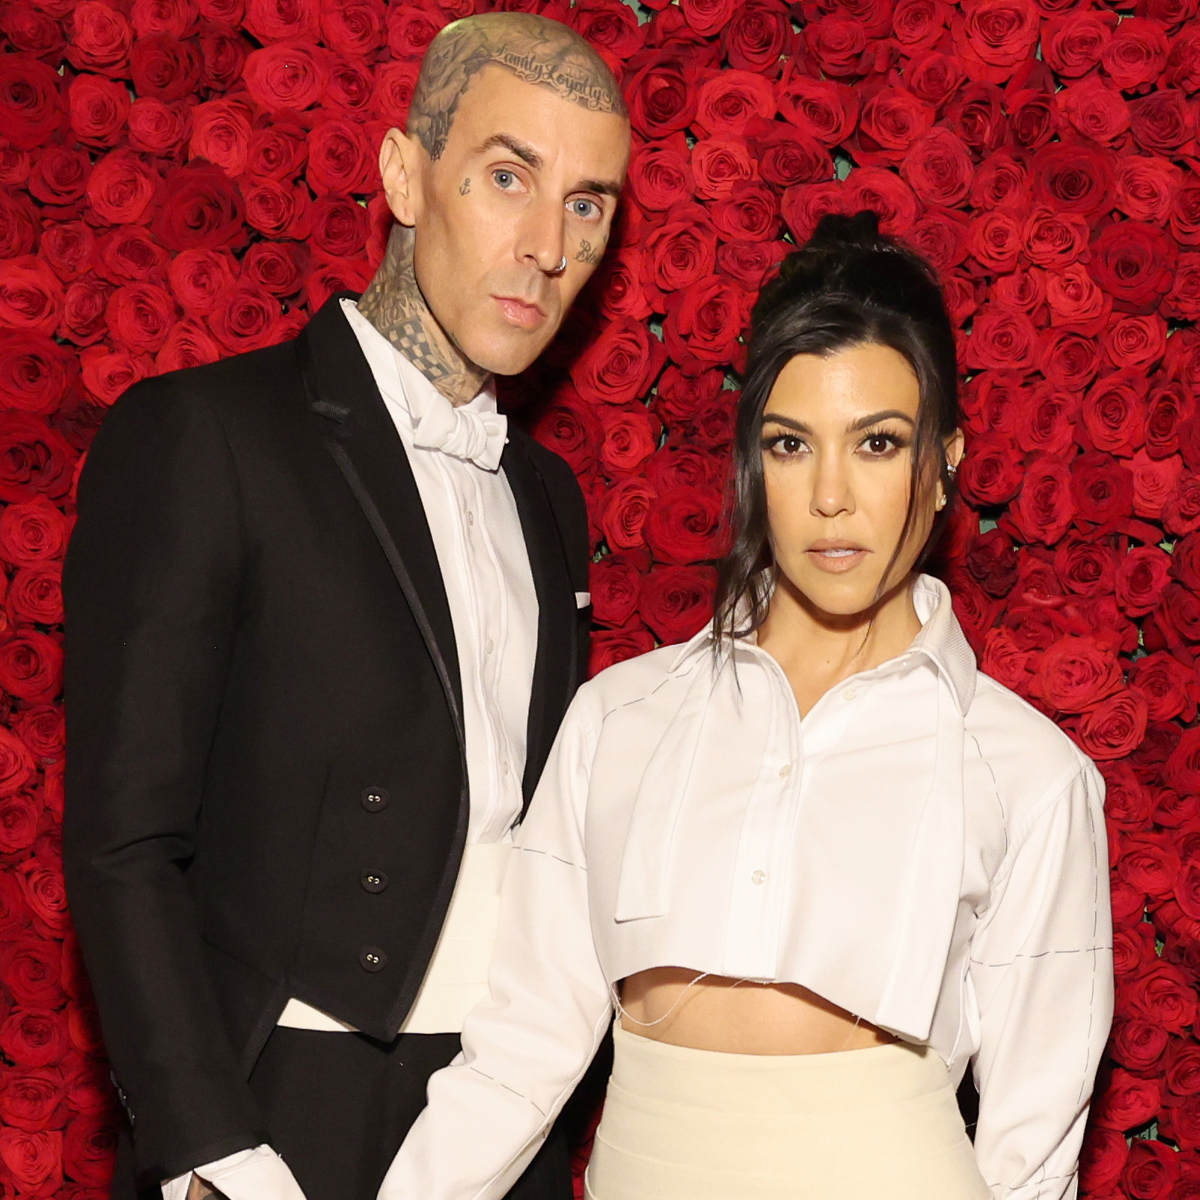 Why Kourtney Kardashian & Travis Barker Are “Officially Done” With IVF